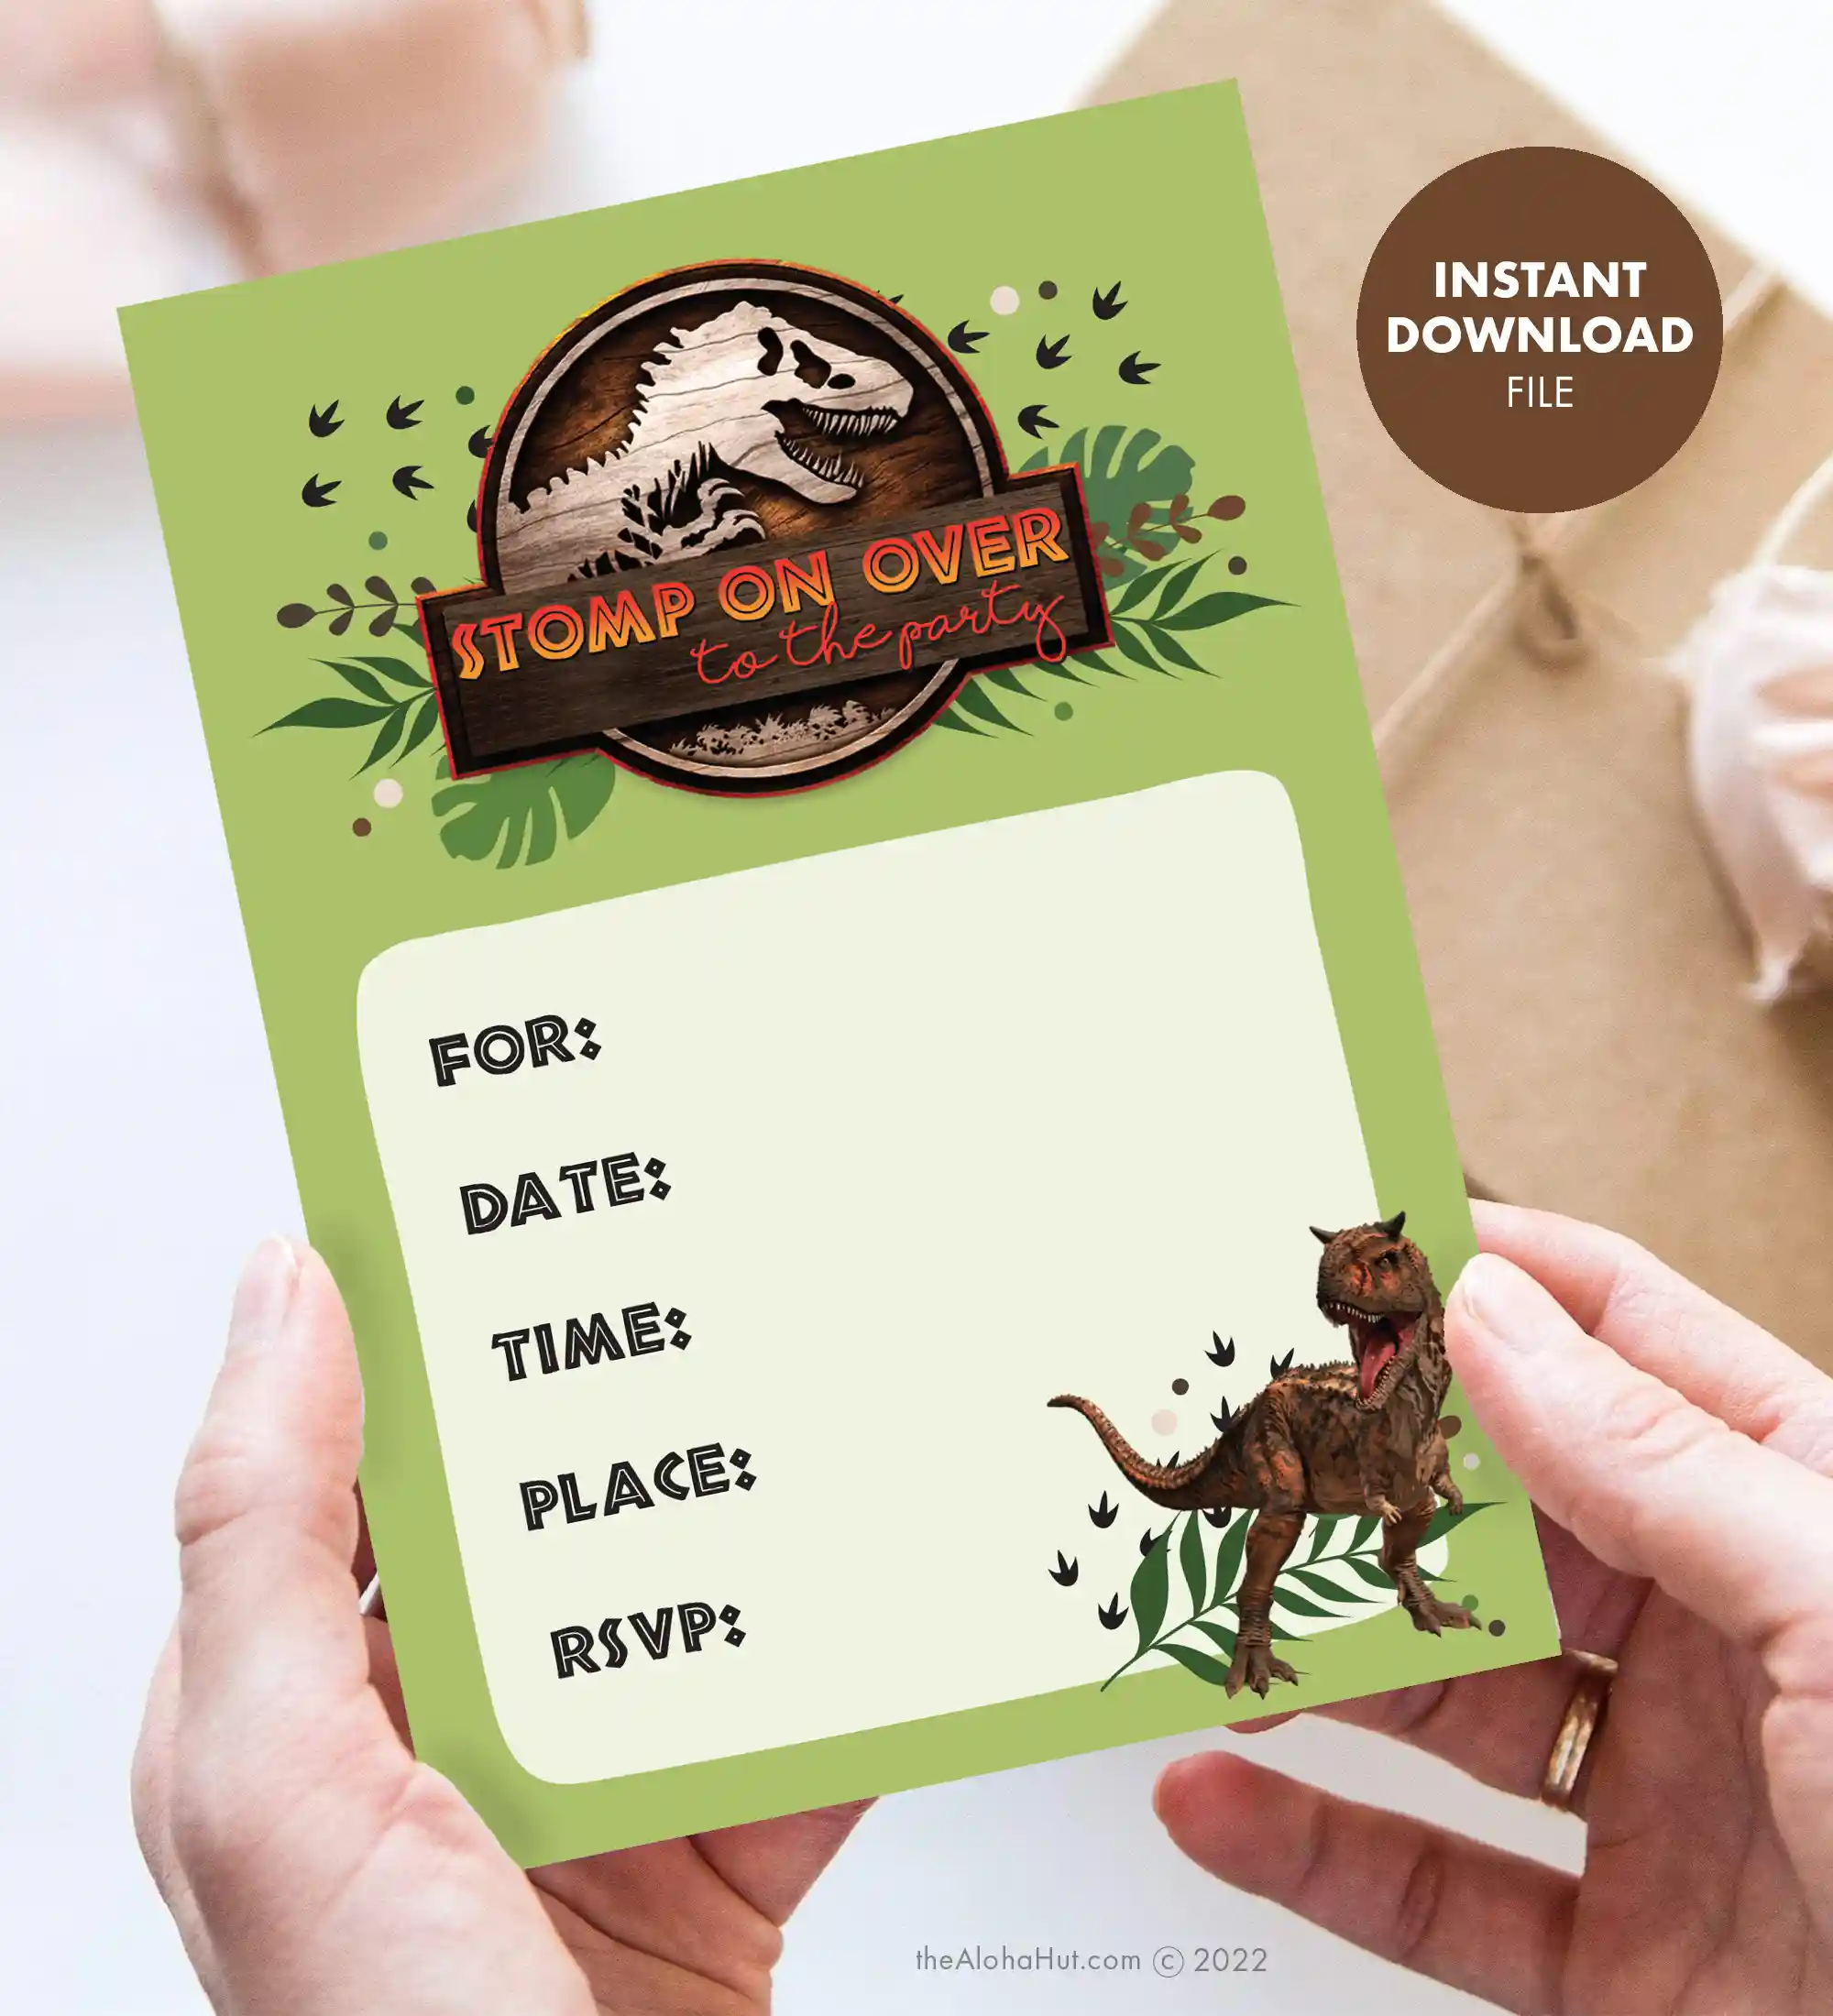 Jurassic World Camp Cretaceous Party Ideas - Dinosaur Party Ideas - free printable party decor & games - invitations